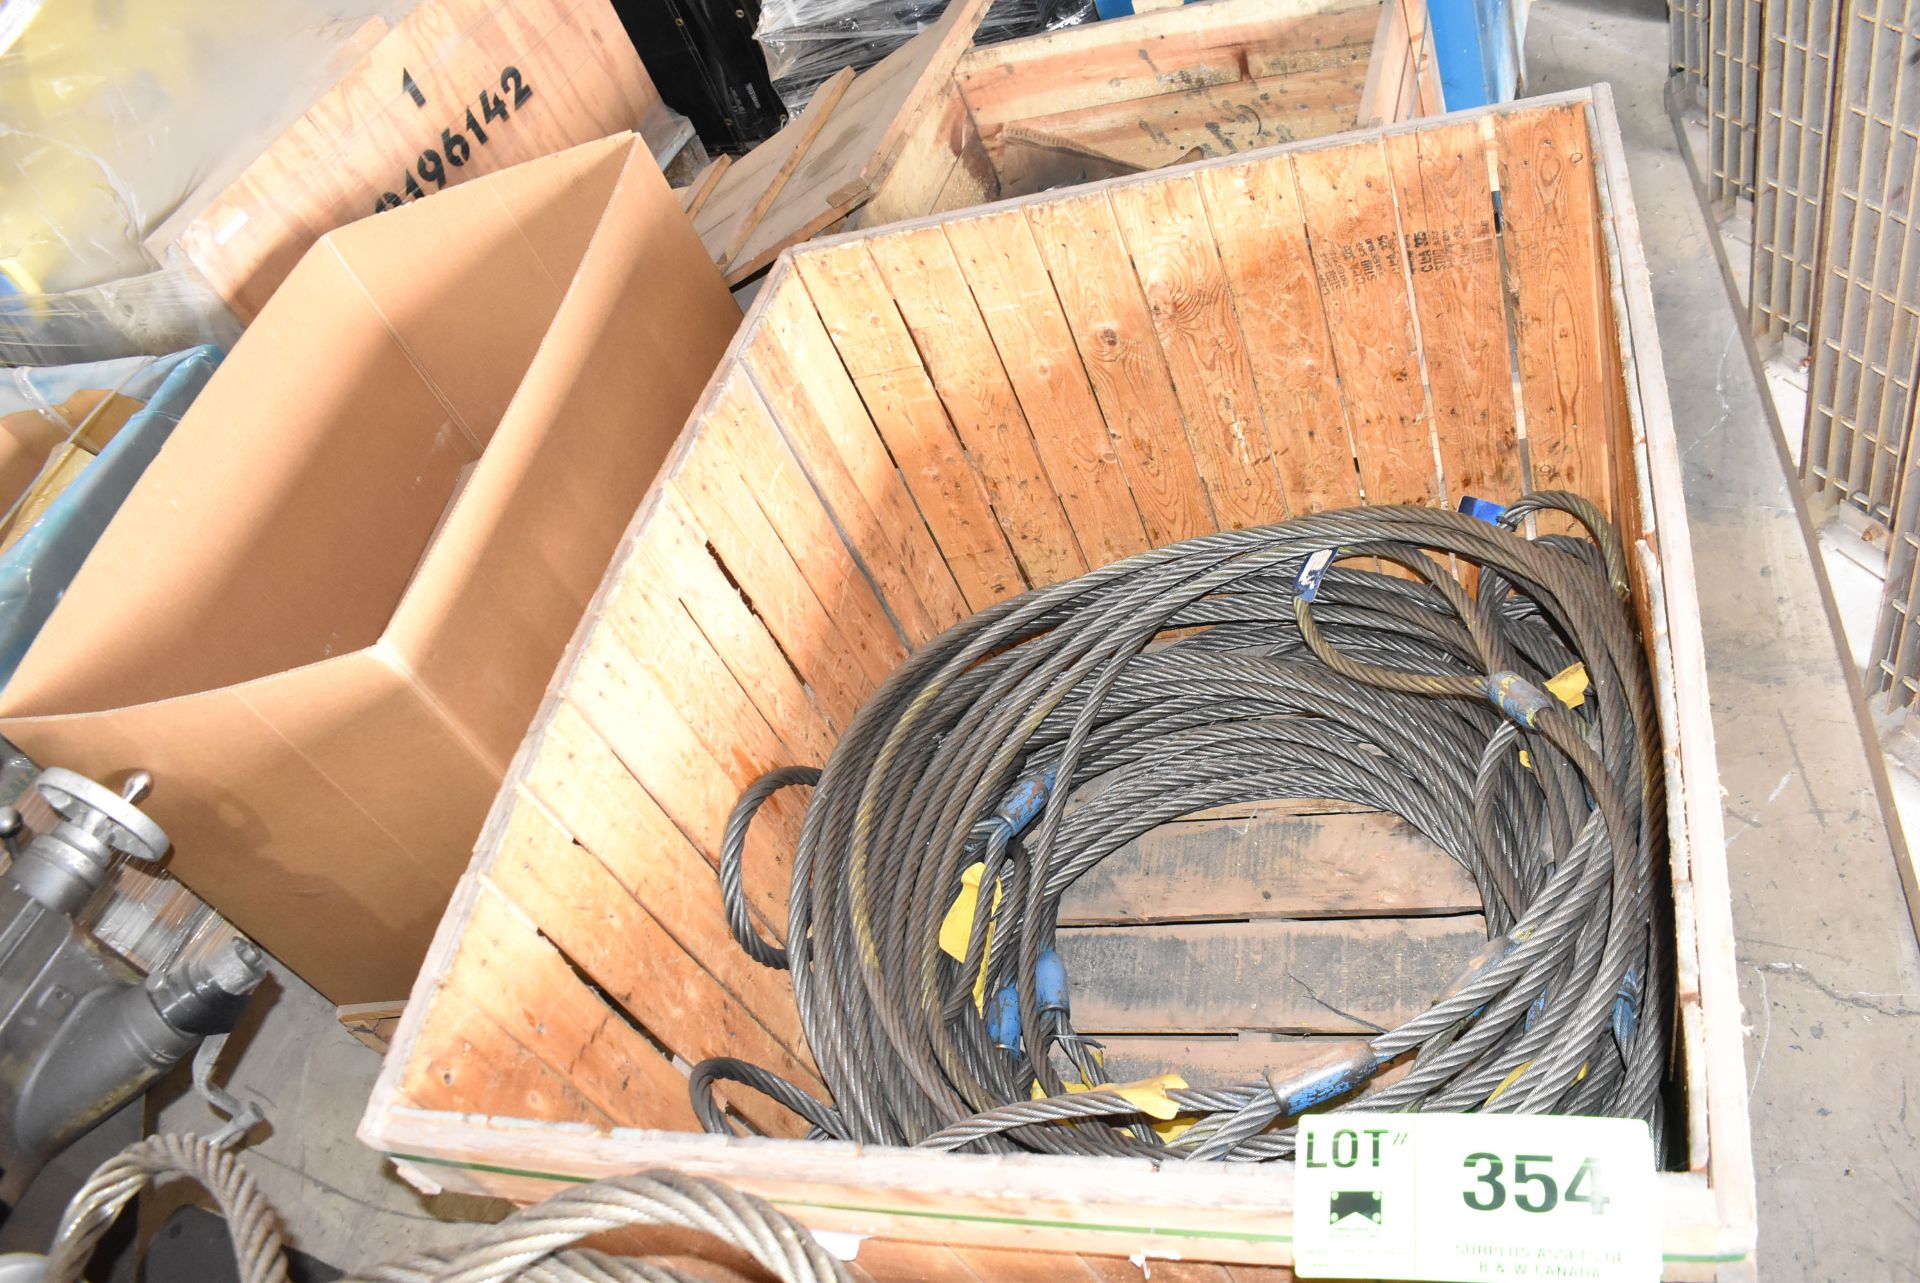 LOT/ CONTENTS OF CRATE - WIRE ROPE SLINGS